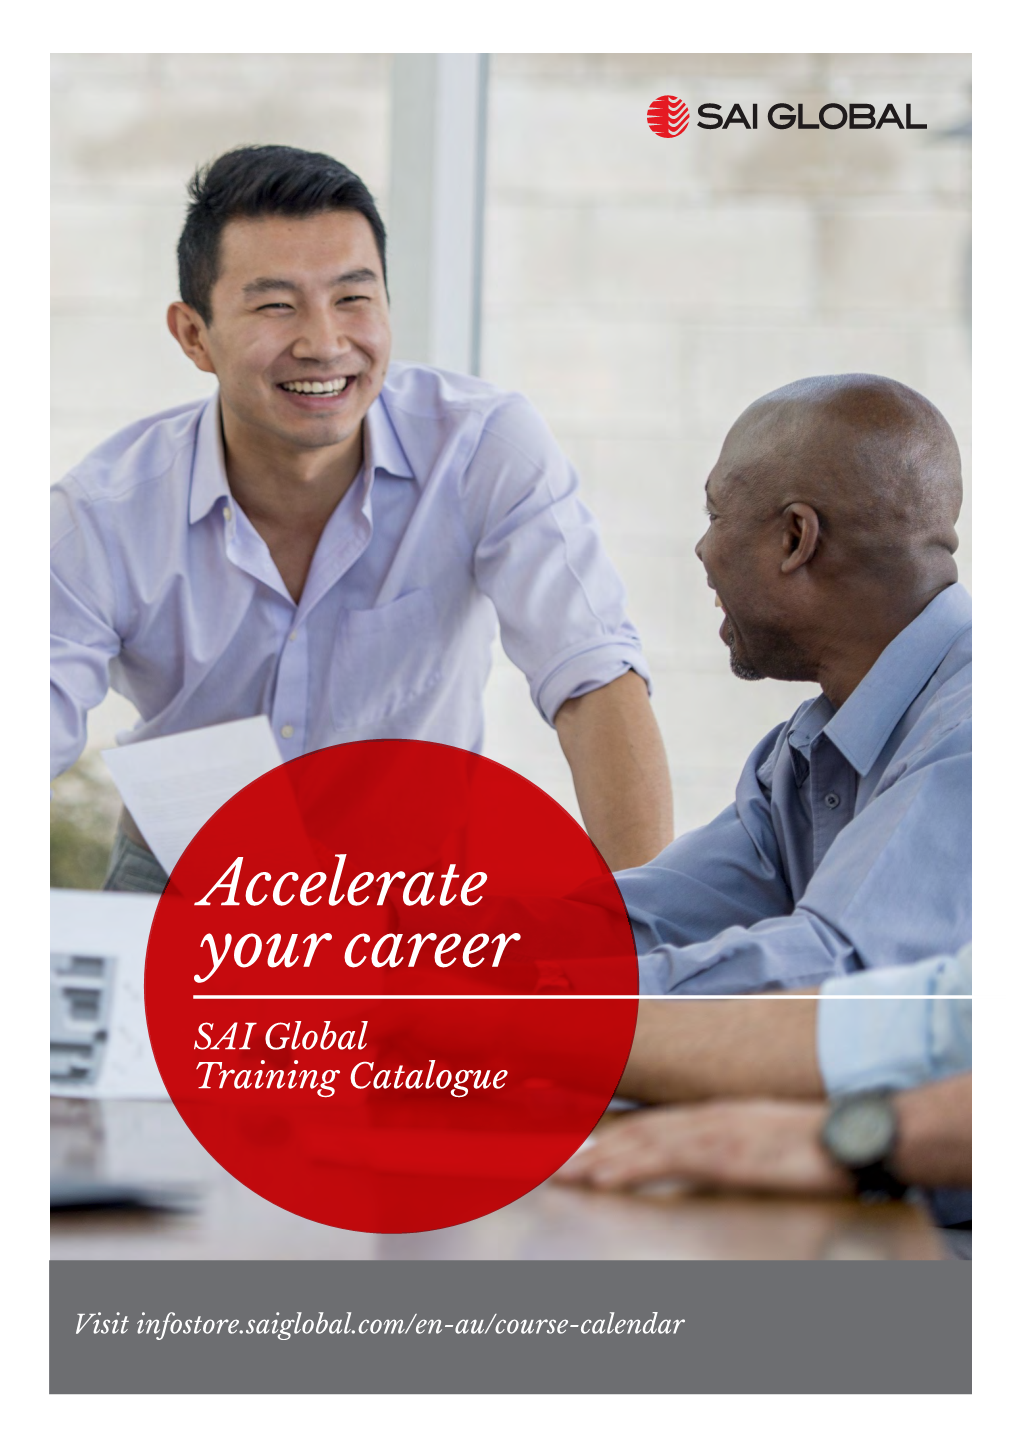 Accelerate Your Career